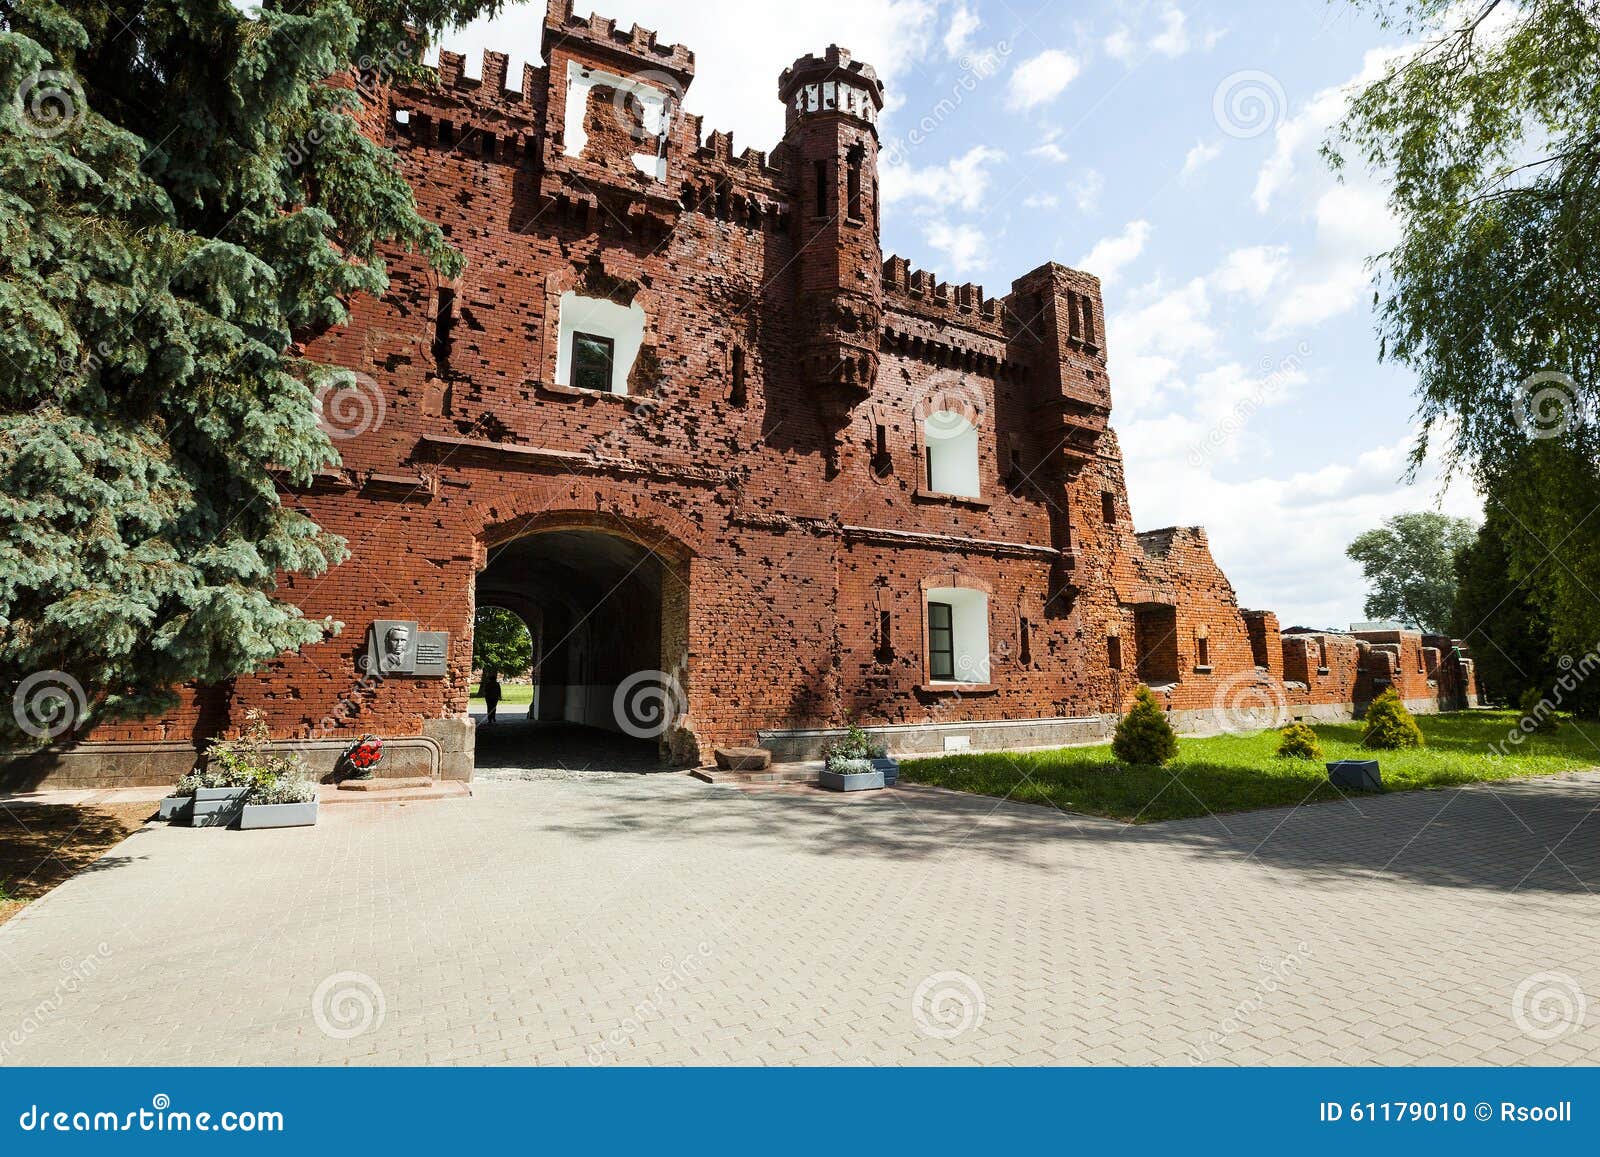 The Brest Fortress stock photo. Image of ancient, exterior - 61179010